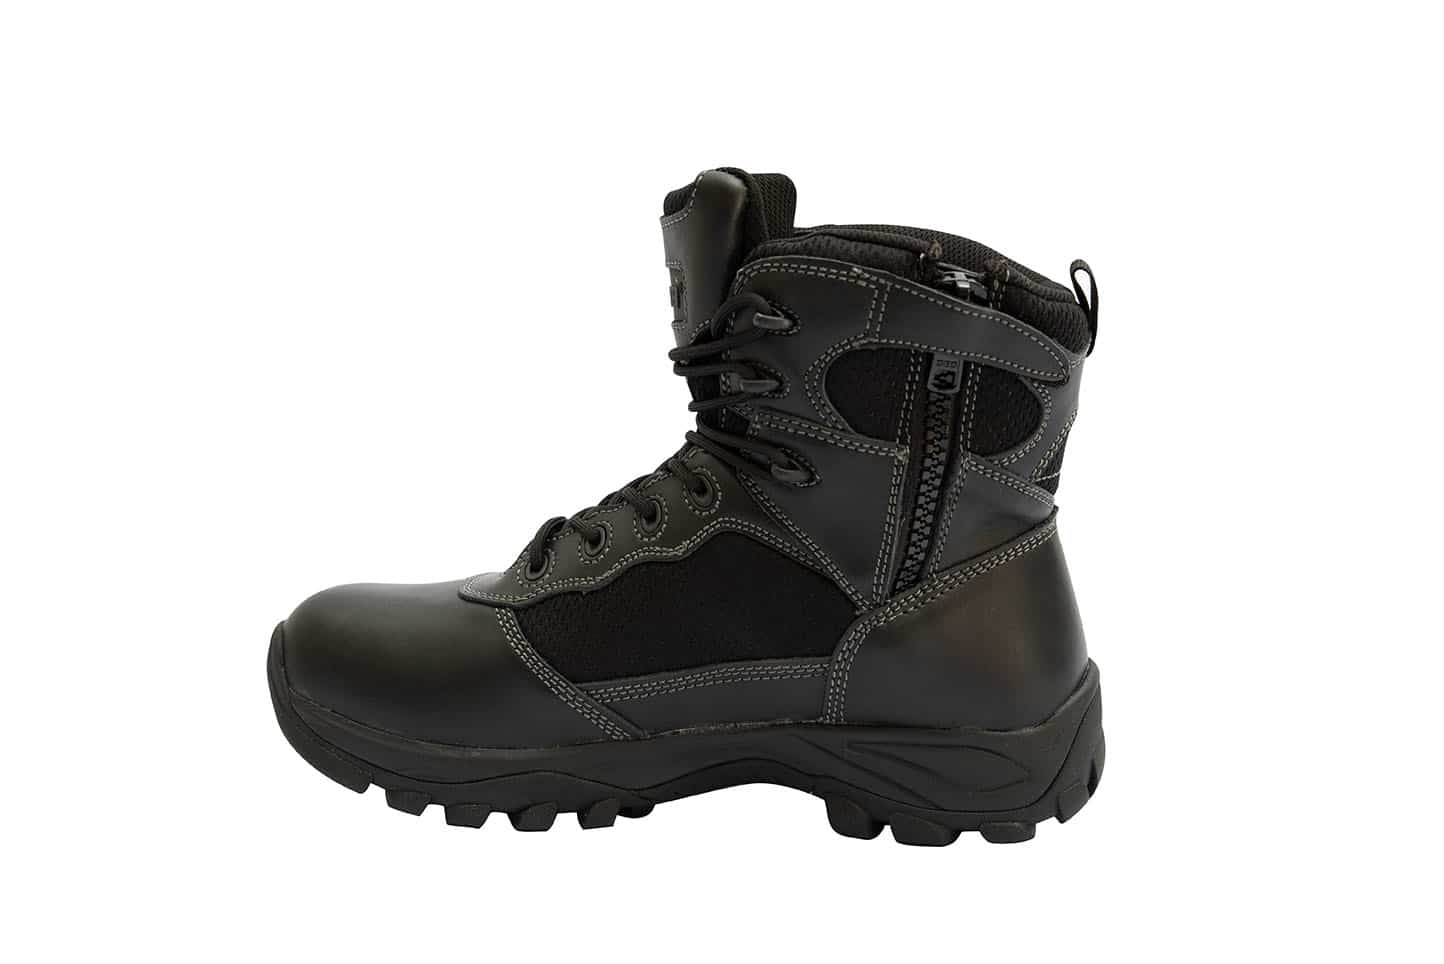 BUCKMASTER ENFORCER BLACK BOOTS - Blades and Triggers